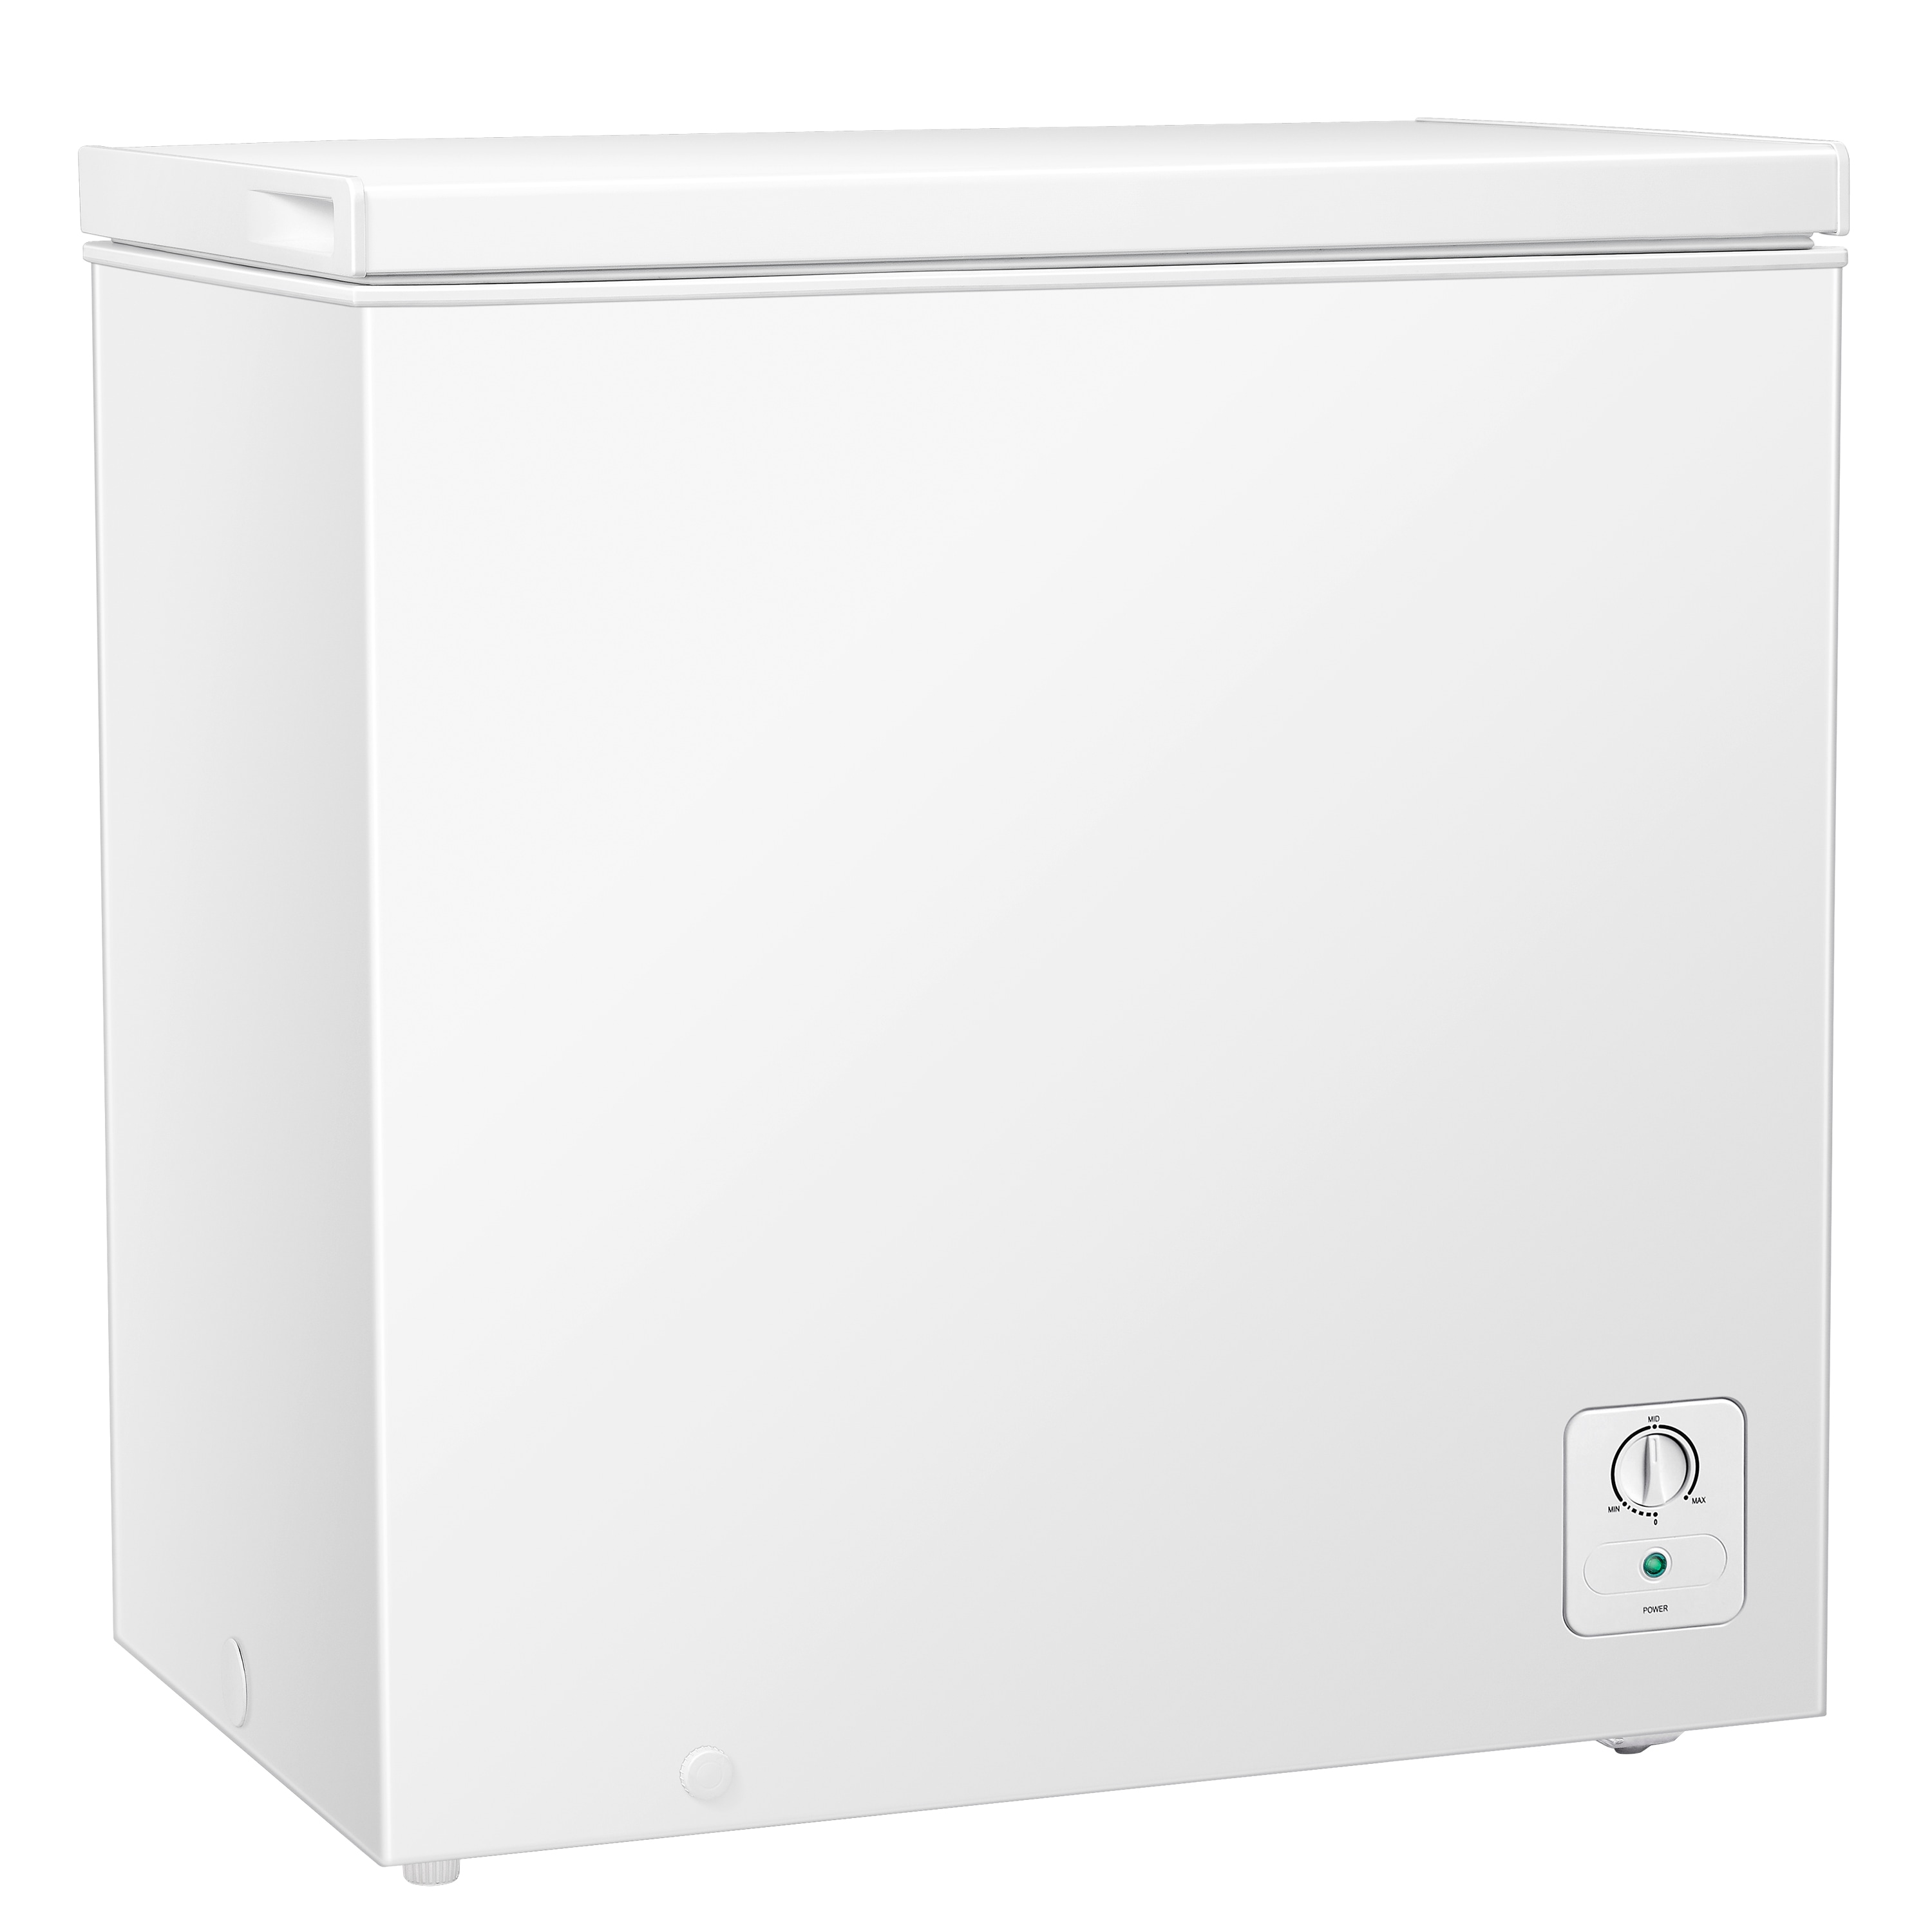 Small chest freezer that rolls out underneath countertop. Locks in